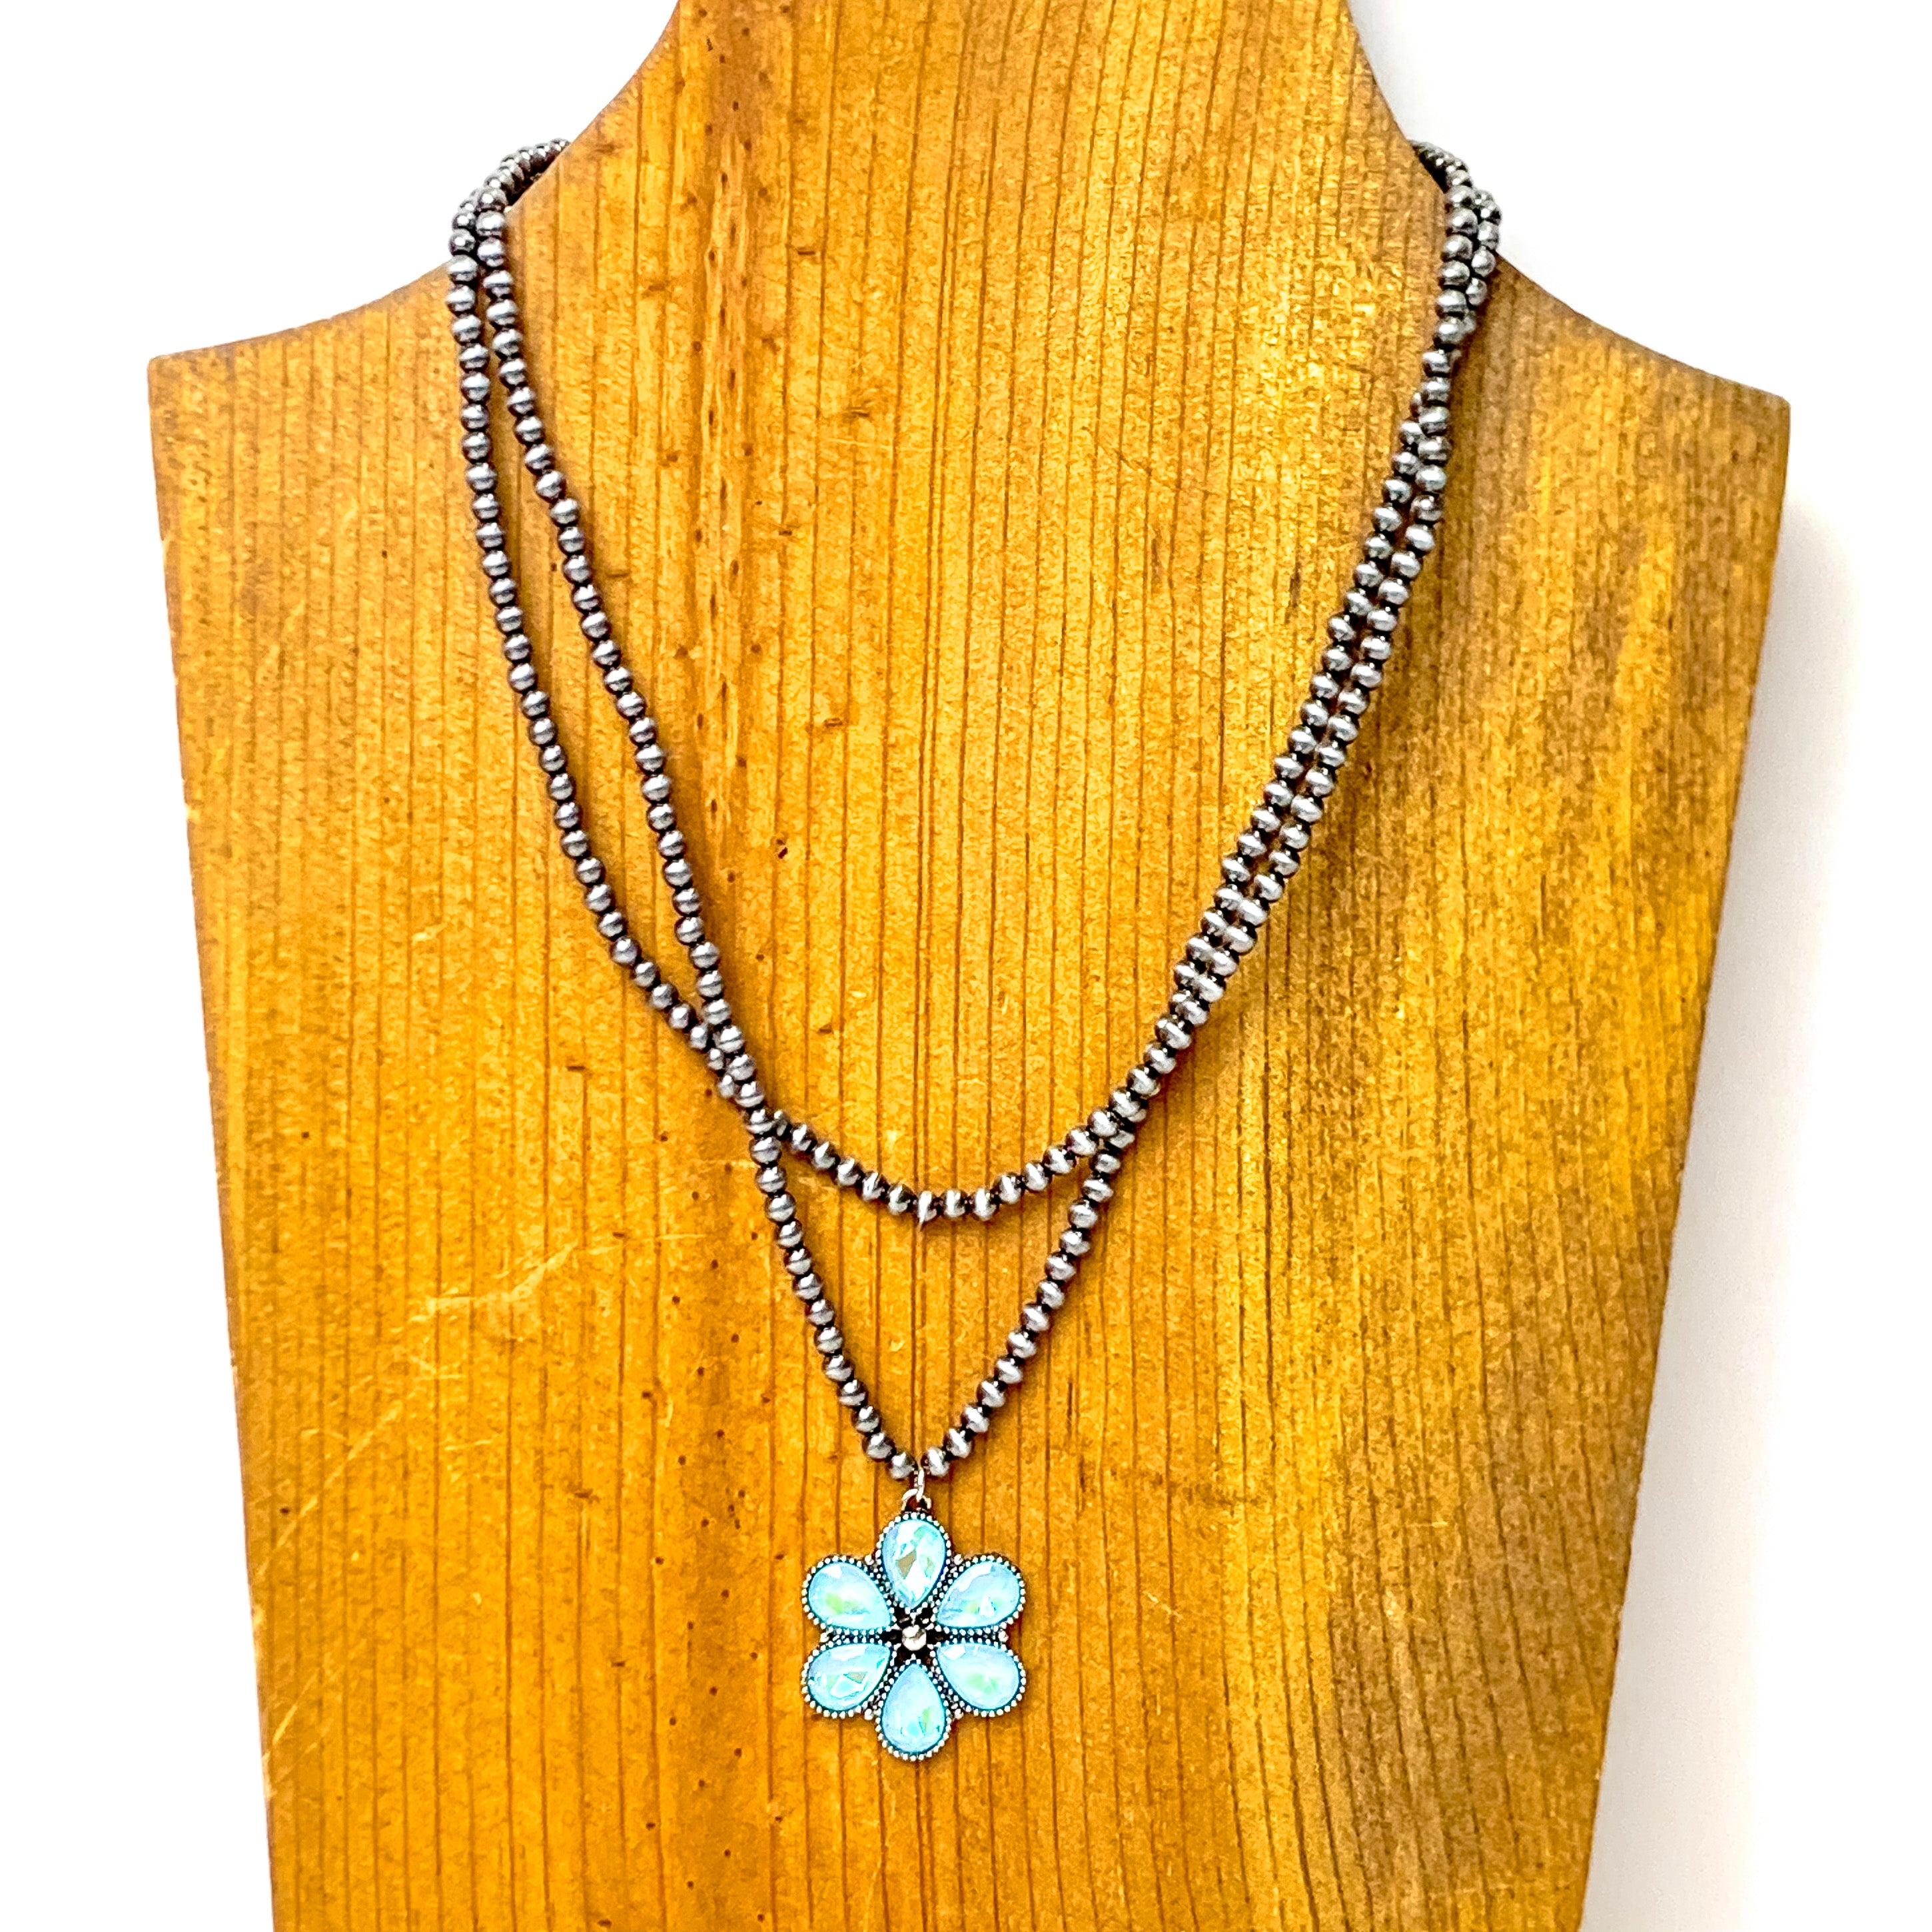 Bourbon Blooms Faux Navajo Pearl Necklace in Turquoise Blue and Silver Tone - Giddy Up Glamour Boutique